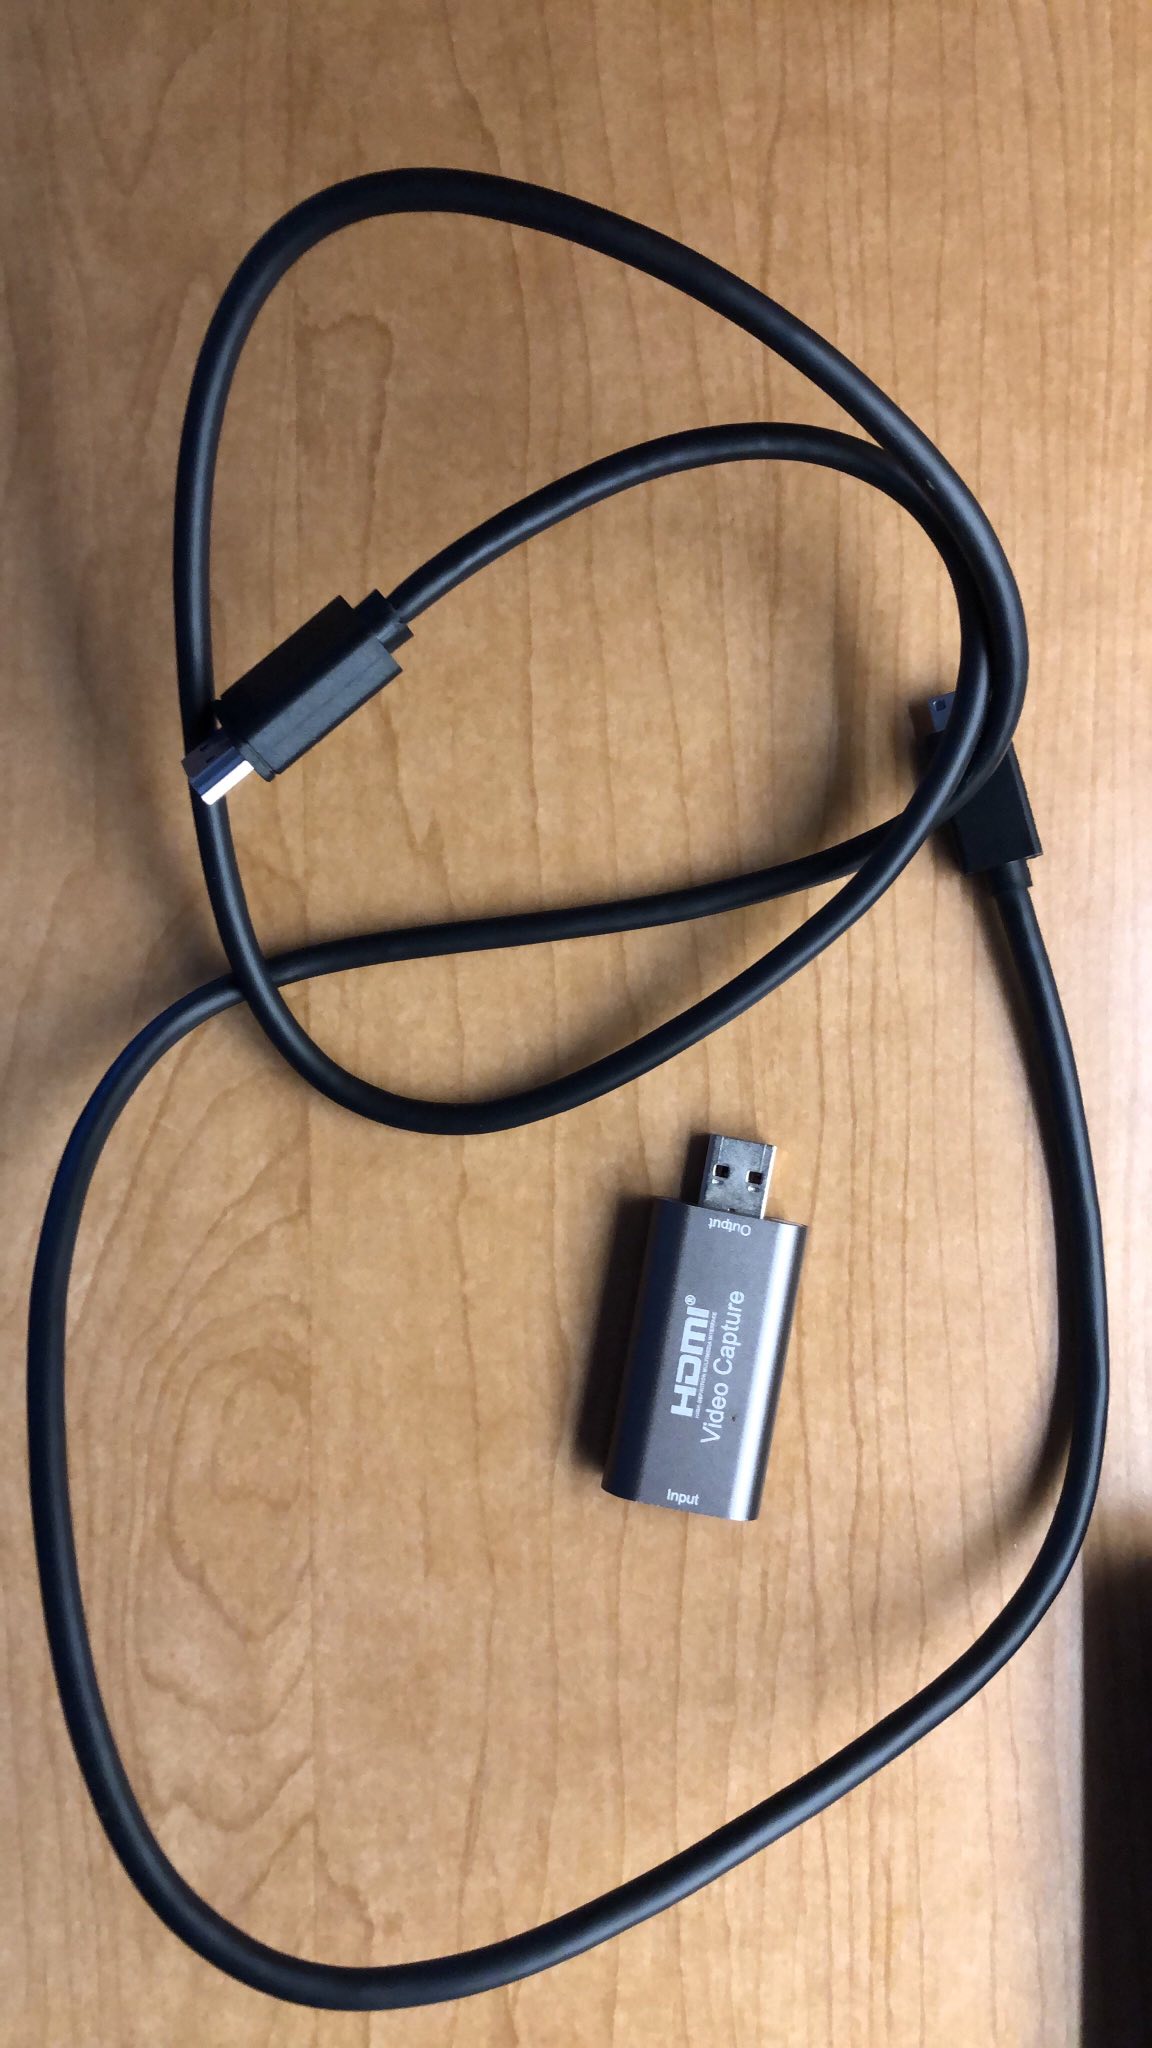 HDMI cable and USB capture card